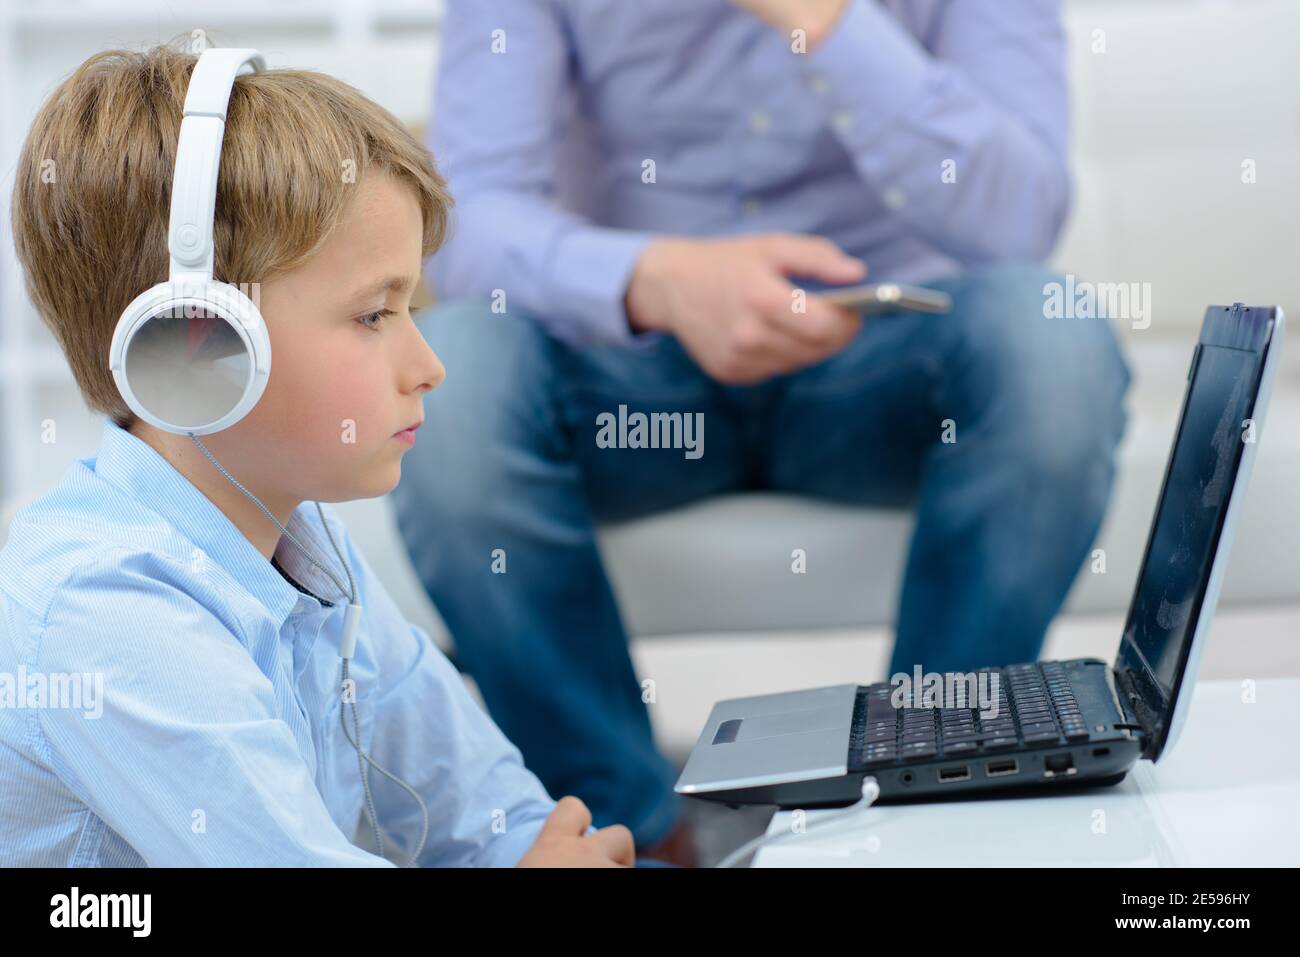 Young boy with a laptop Stock Photo